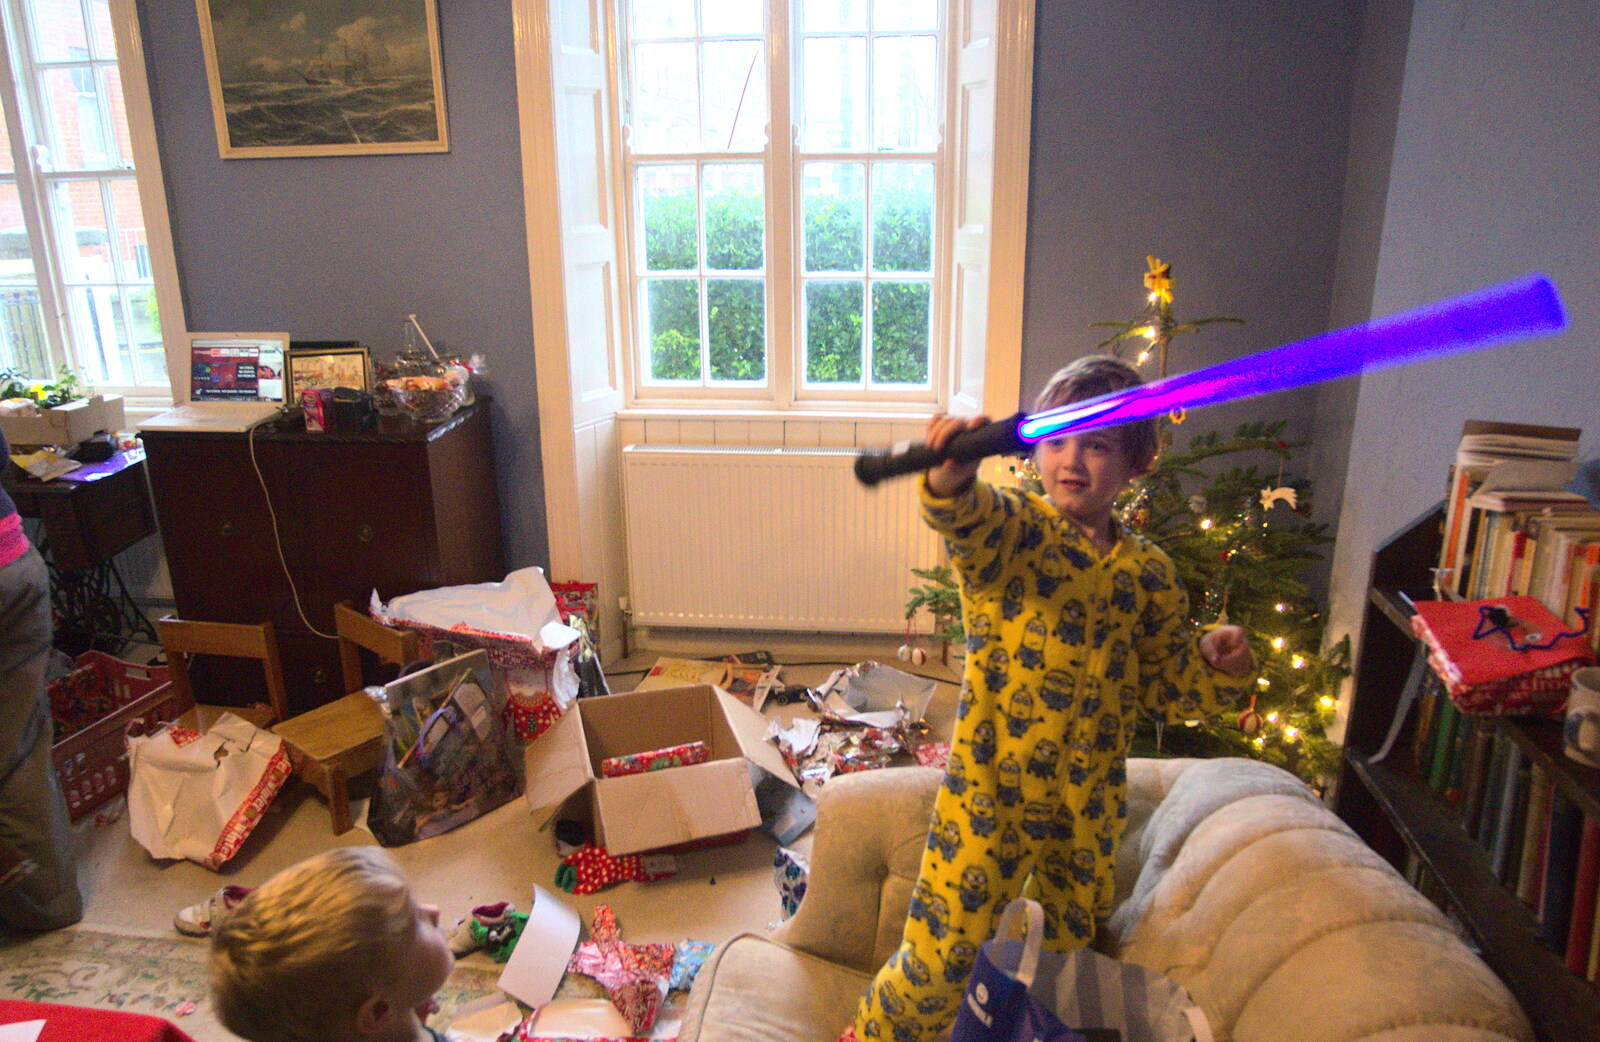 Fred waves a light sabre around from Christmas in Blackrock and St. Stephen's in Ballybrack, Dublin, Ireland - 25th December 2015